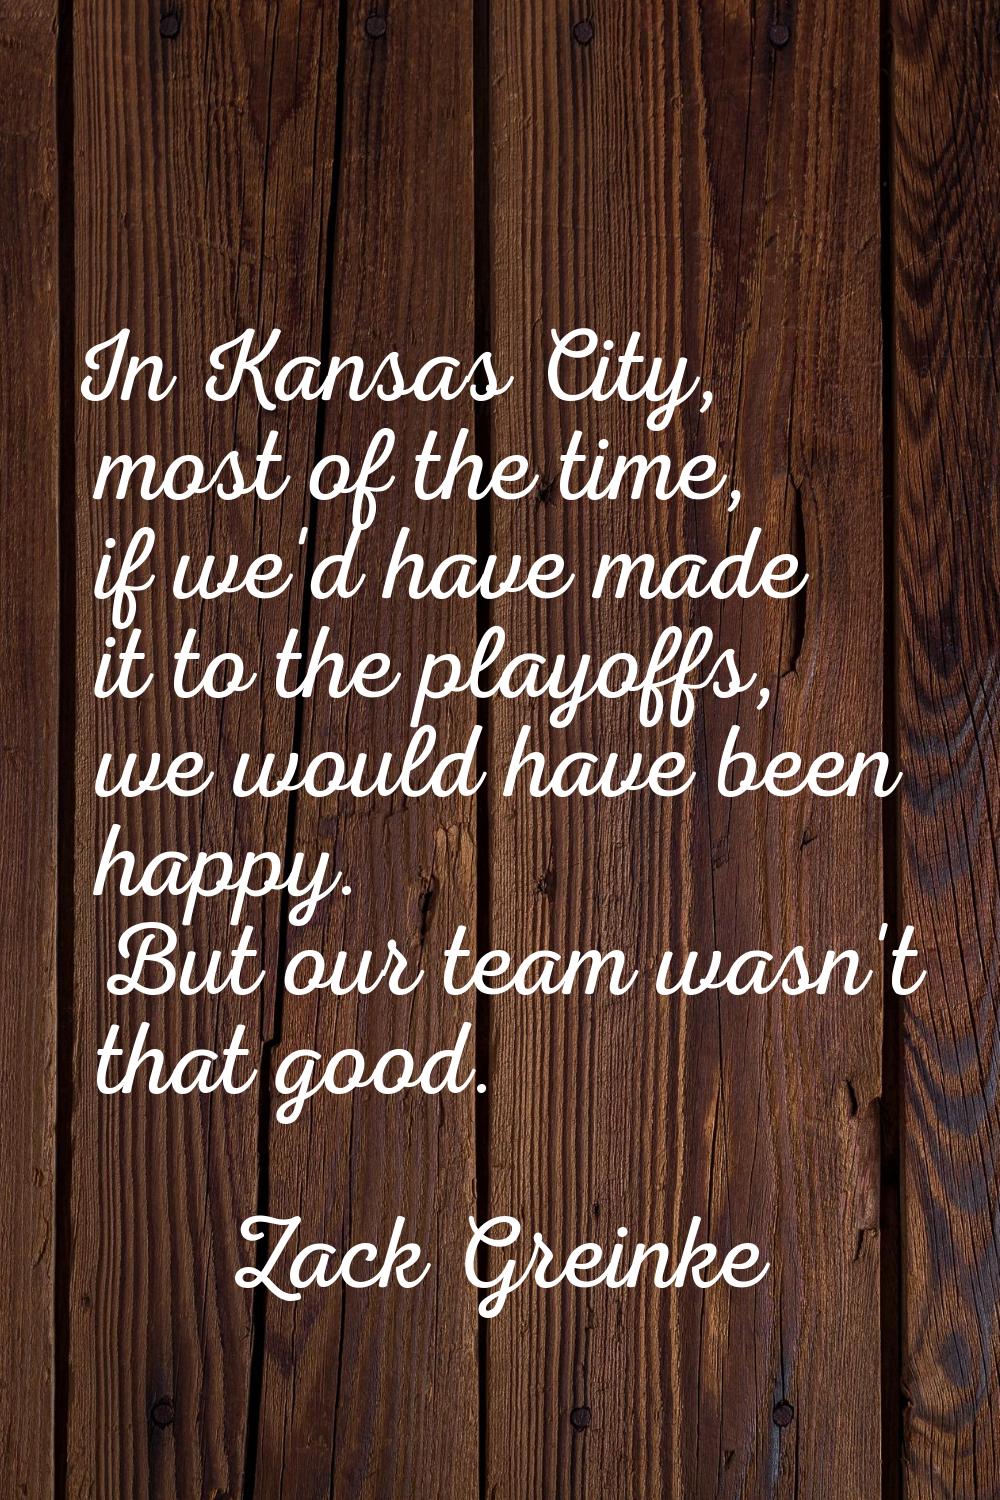 In Kansas City, most of the time, if we'd have made it to the playoffs, we would have been happy. B